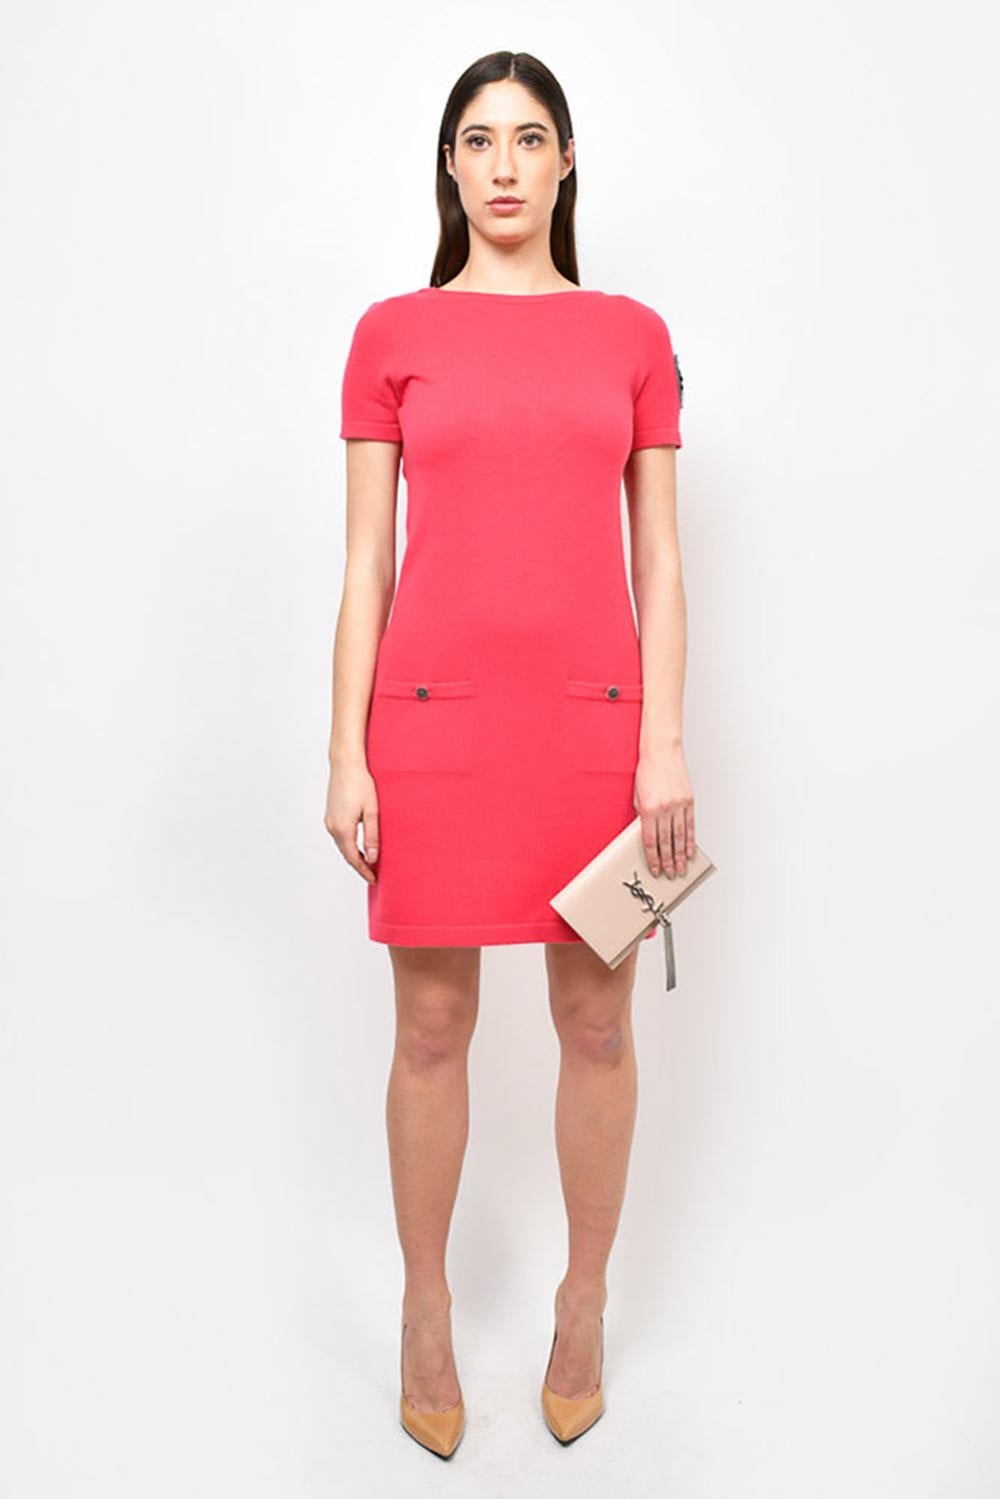 Chanel CC Patch Candy Pink Cashmere Dress 1